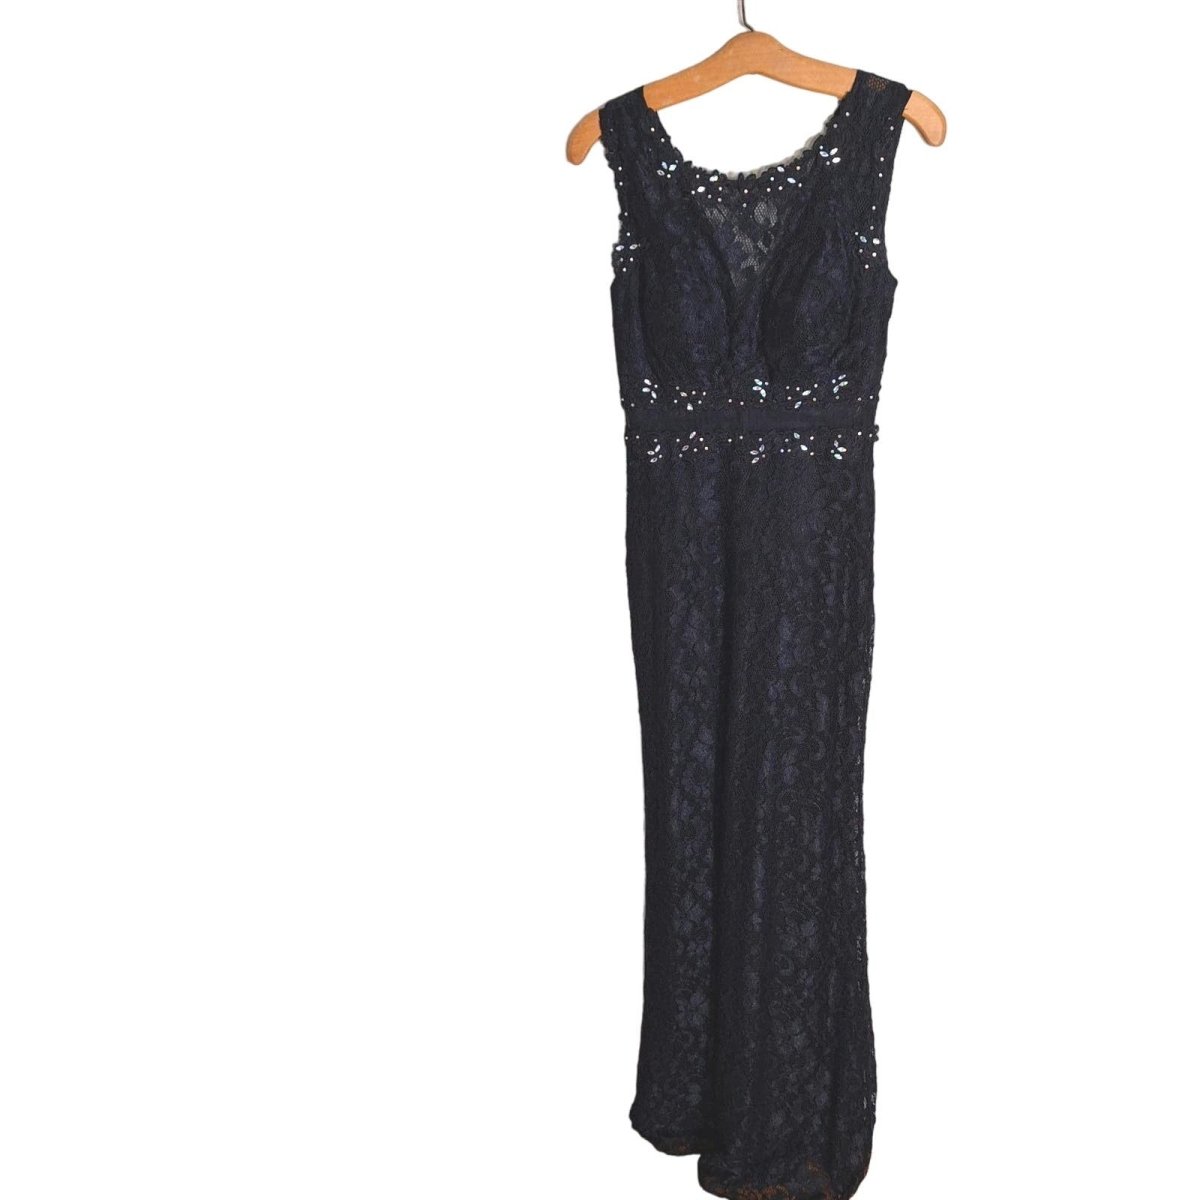 Vintage 90s Deadstock Black Stretch Lace Gown with Mesh and Rhinestone Detail Women Size Small - themallvintage The Mall Vintage